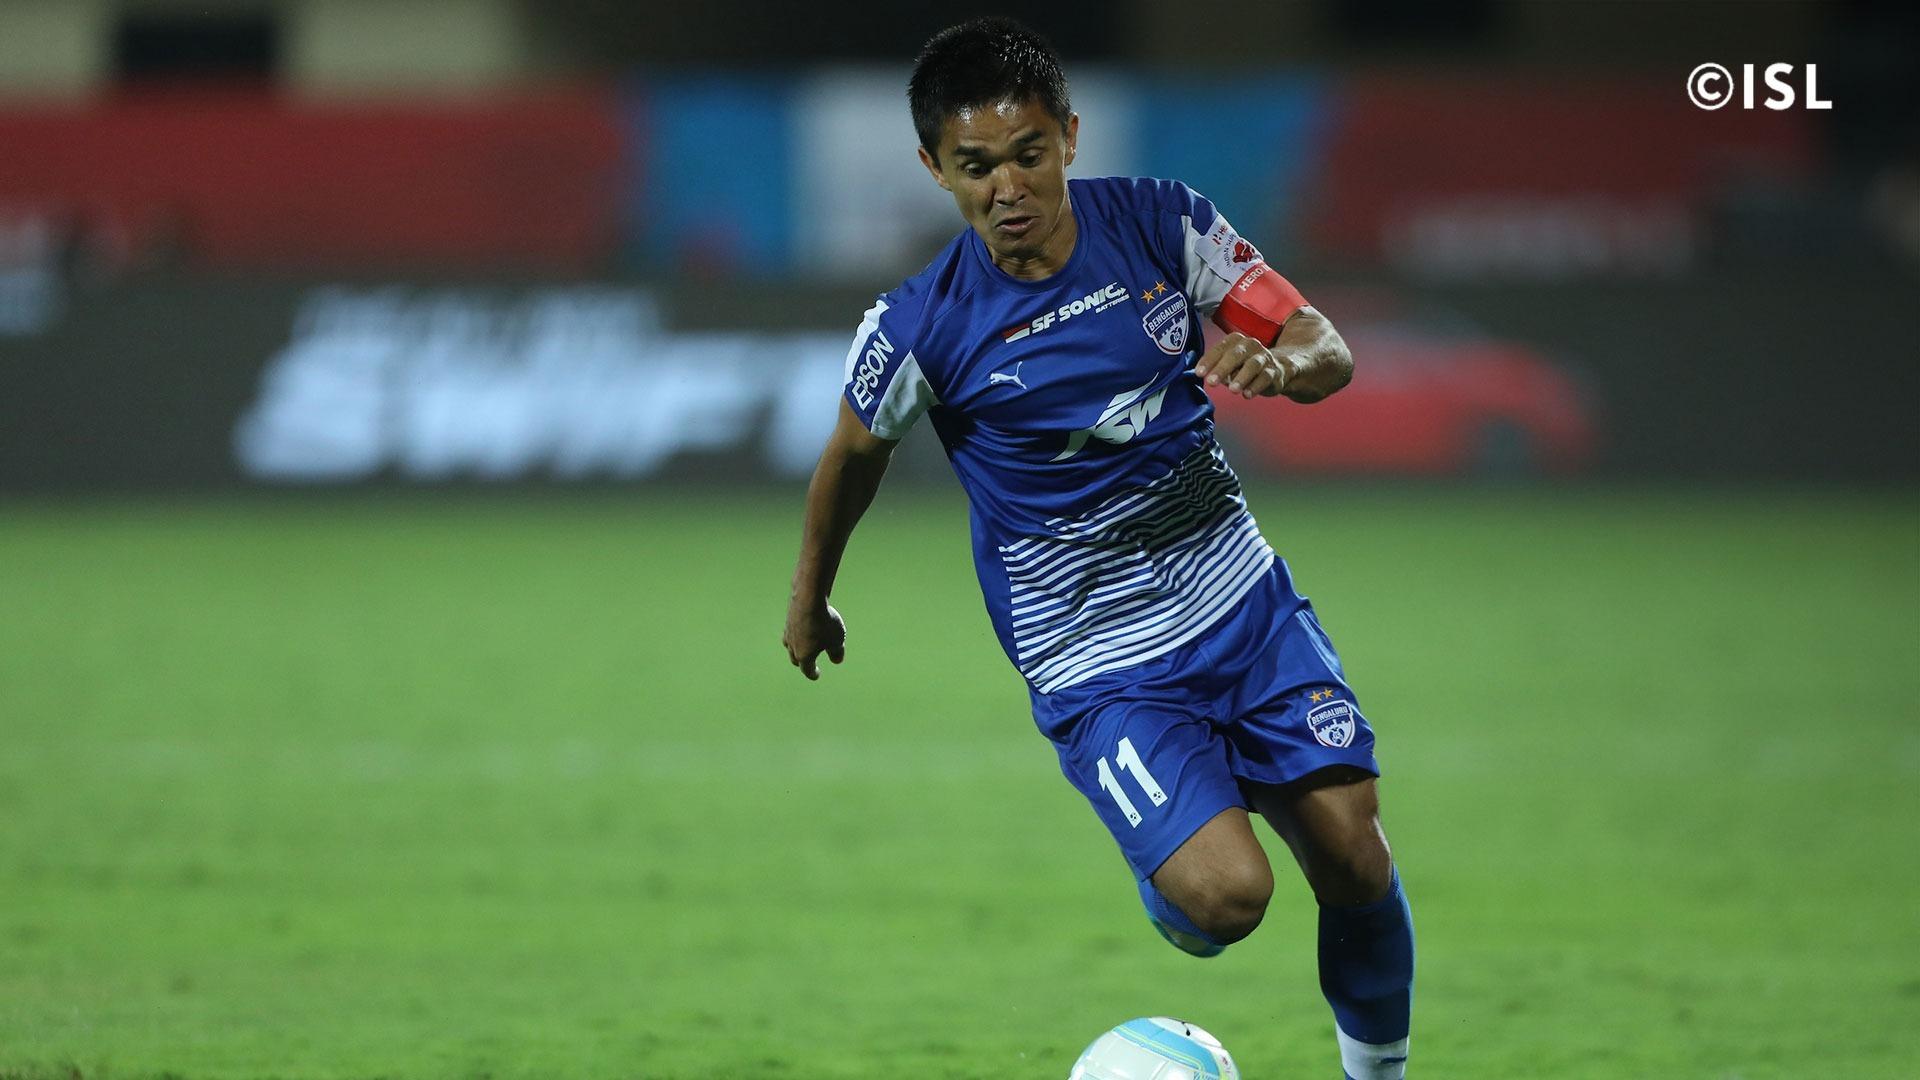 Sunil Chhetri: Very happy and proud of the club and its players